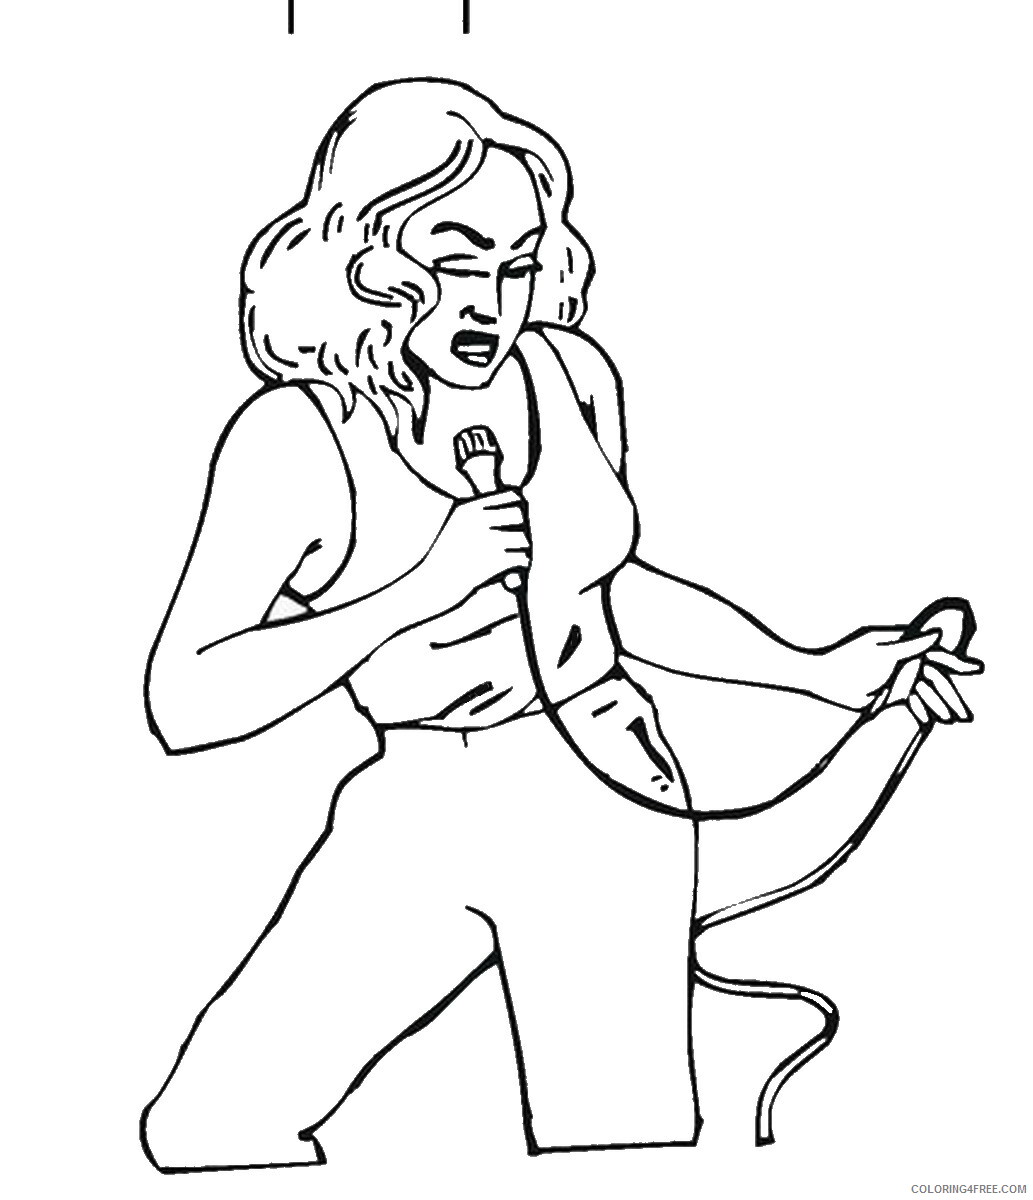 Rock Star Coloring Pages rock_star_coloring_2 Printable 2021 5102 Coloring4free